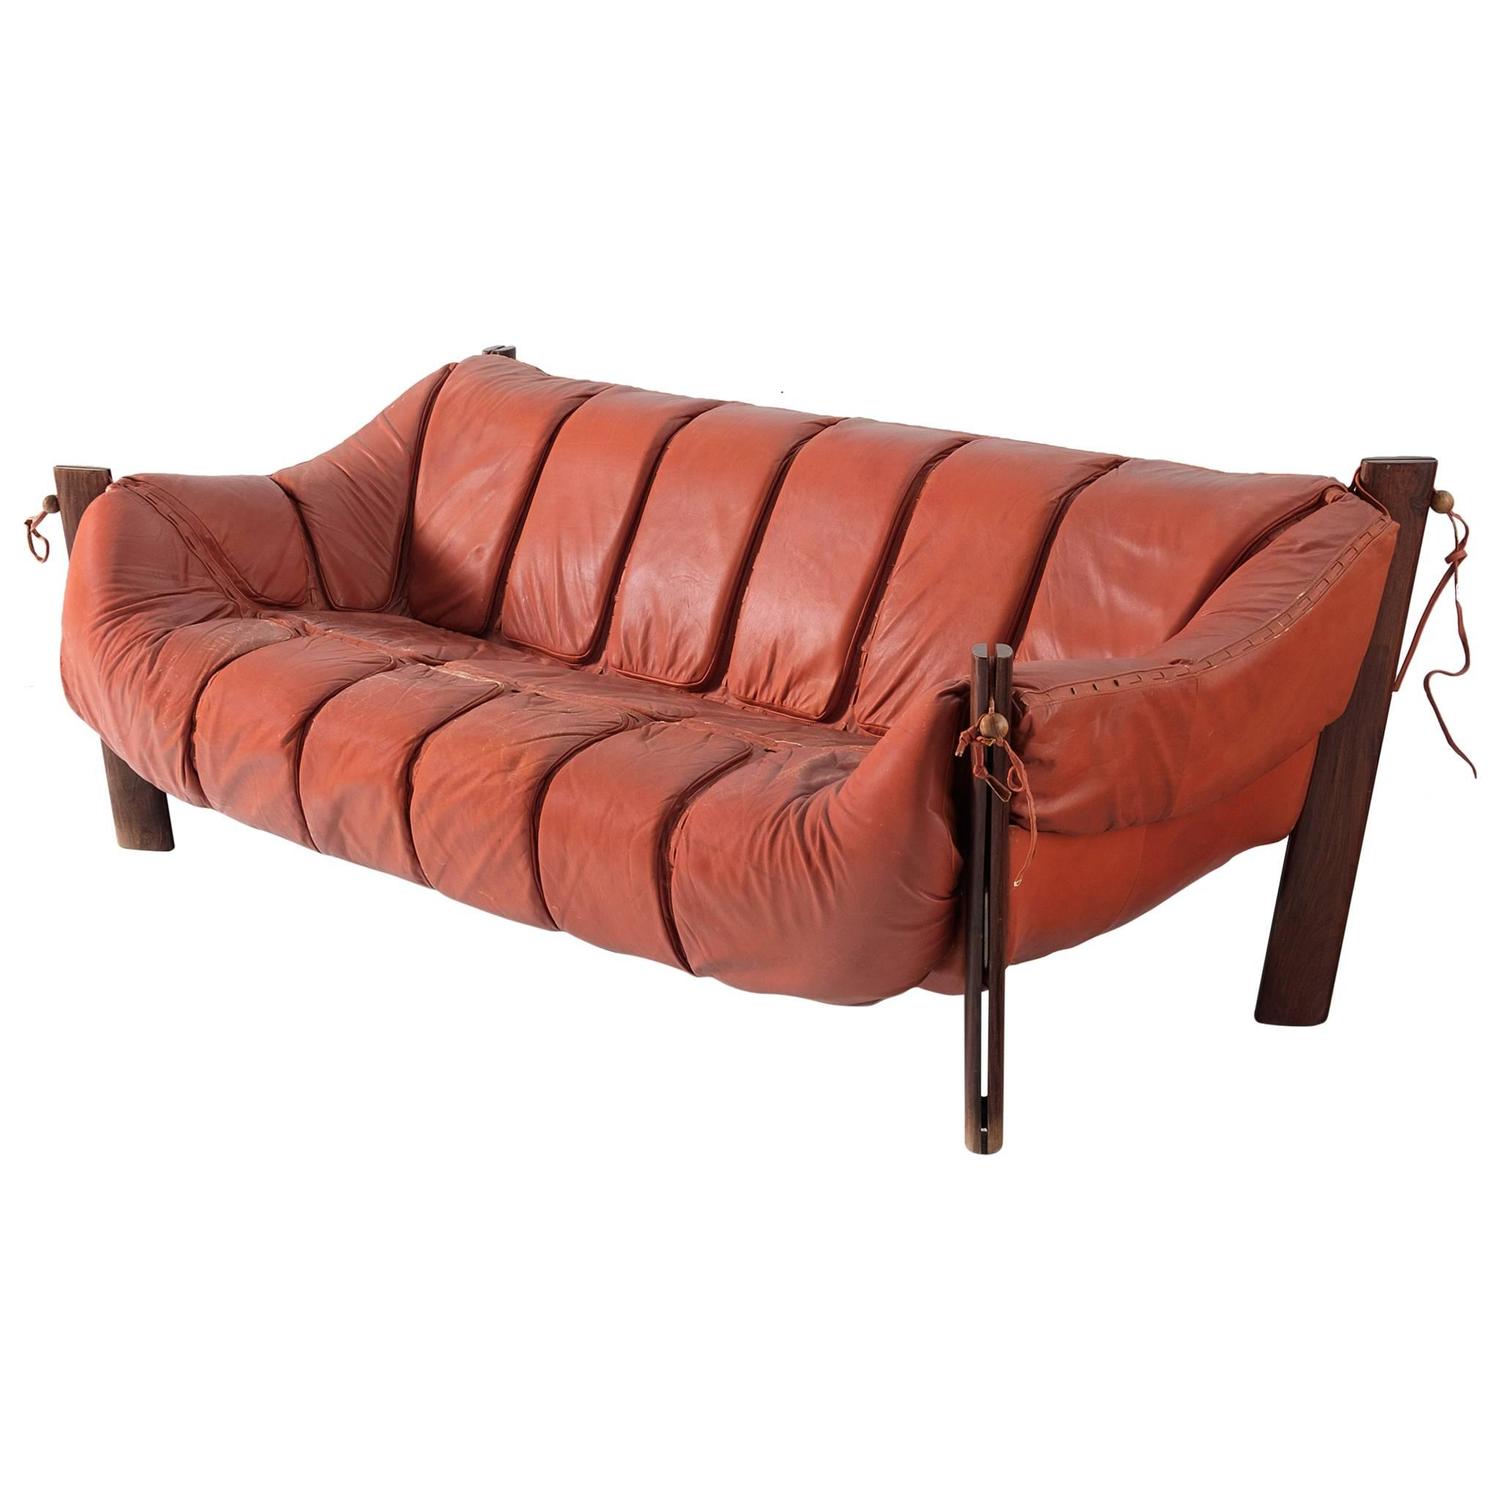 Percival Lafer ThreeSeat Sofa in Rosewood and Leather For